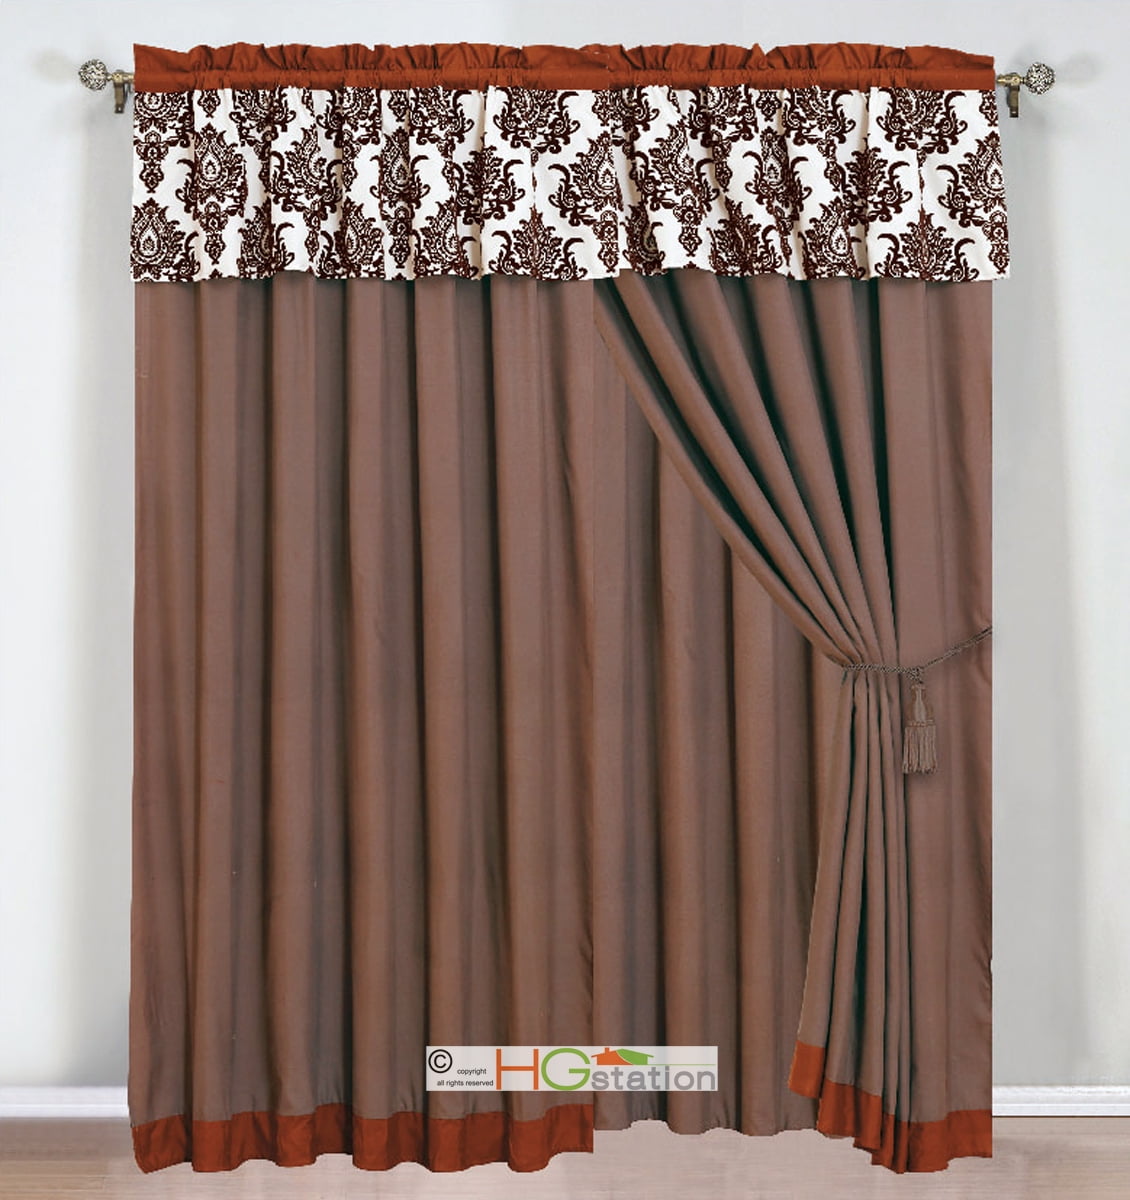 4-Pc Paisley Floral Embroidery Curtain Set Brown Khaki Beige Valance Sheer Liner